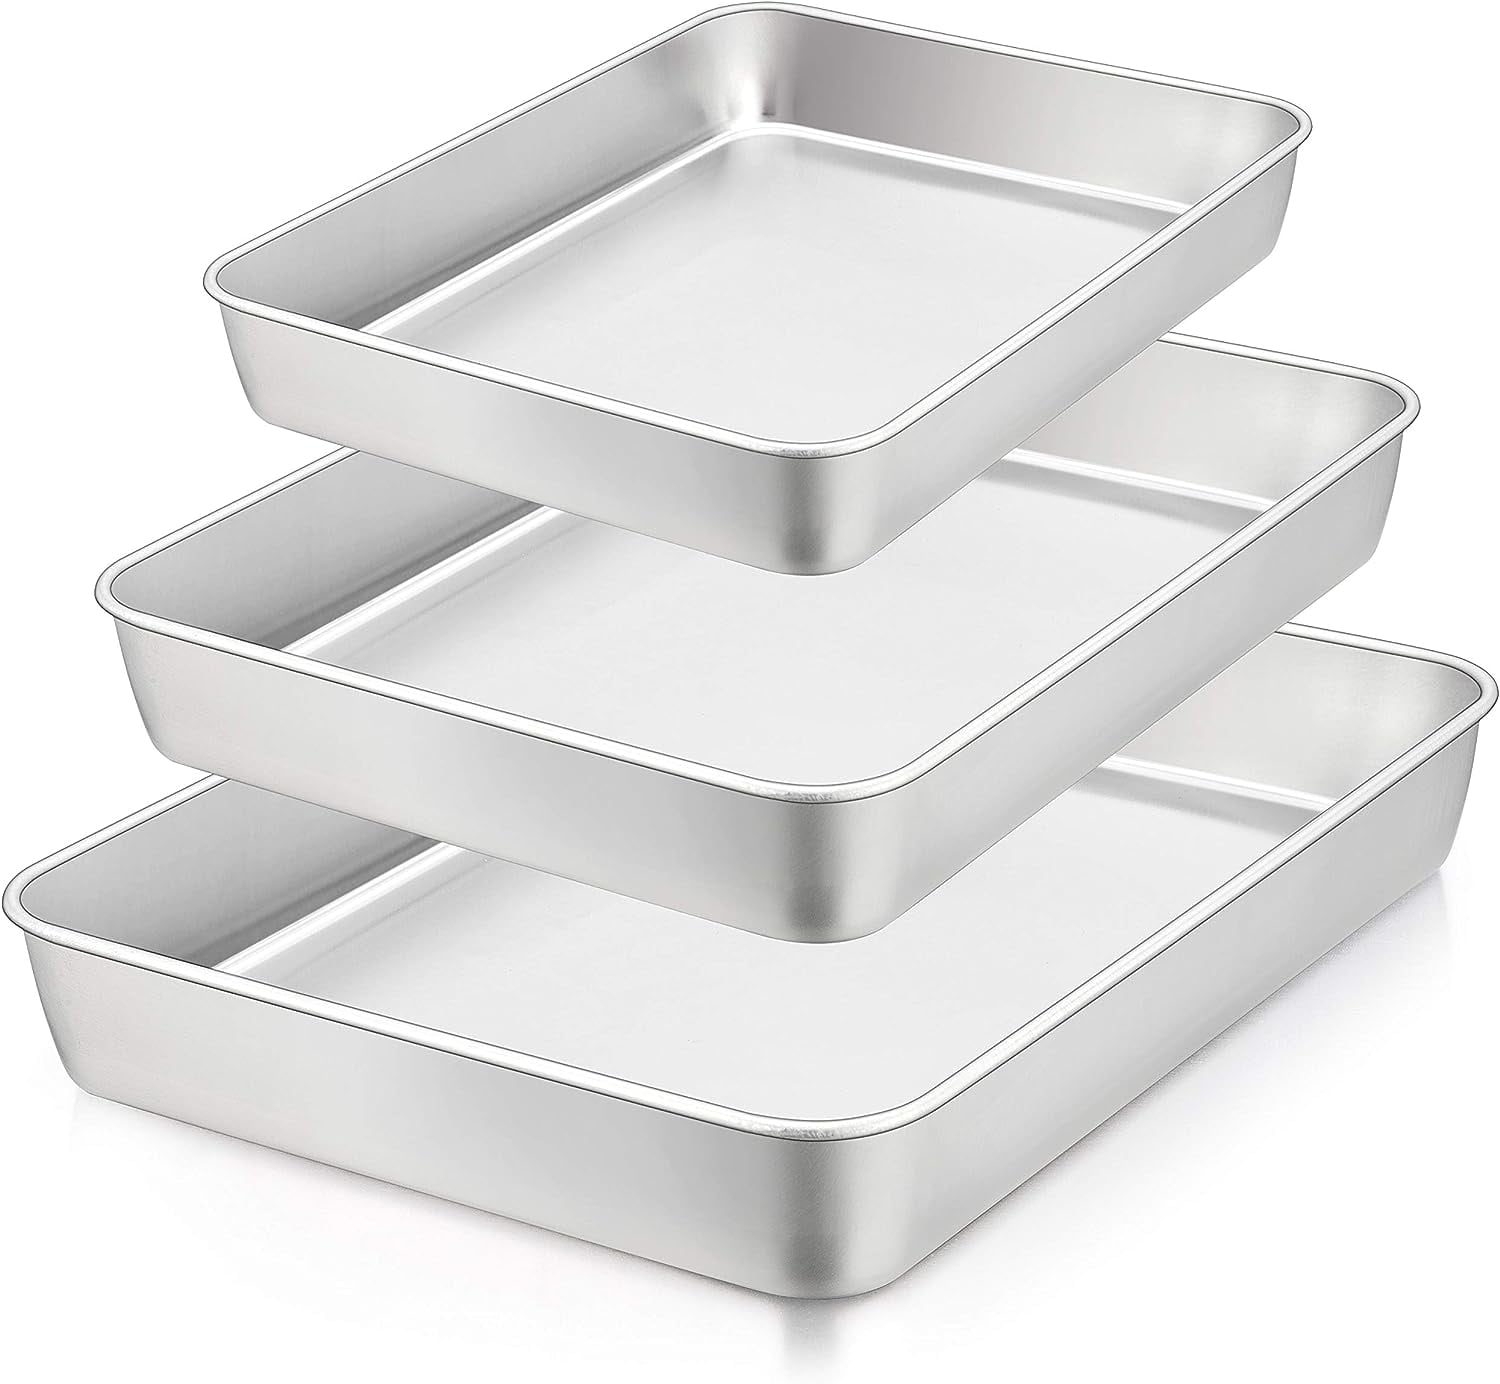 P&P CHEF 4 Inch Mini Cake Pan Set of 3, Non-Stick Round Baking Cake Pans  Tins for Small Tier Smash Cakes, Non-Toxic & Solid, Stainless Steel Core 